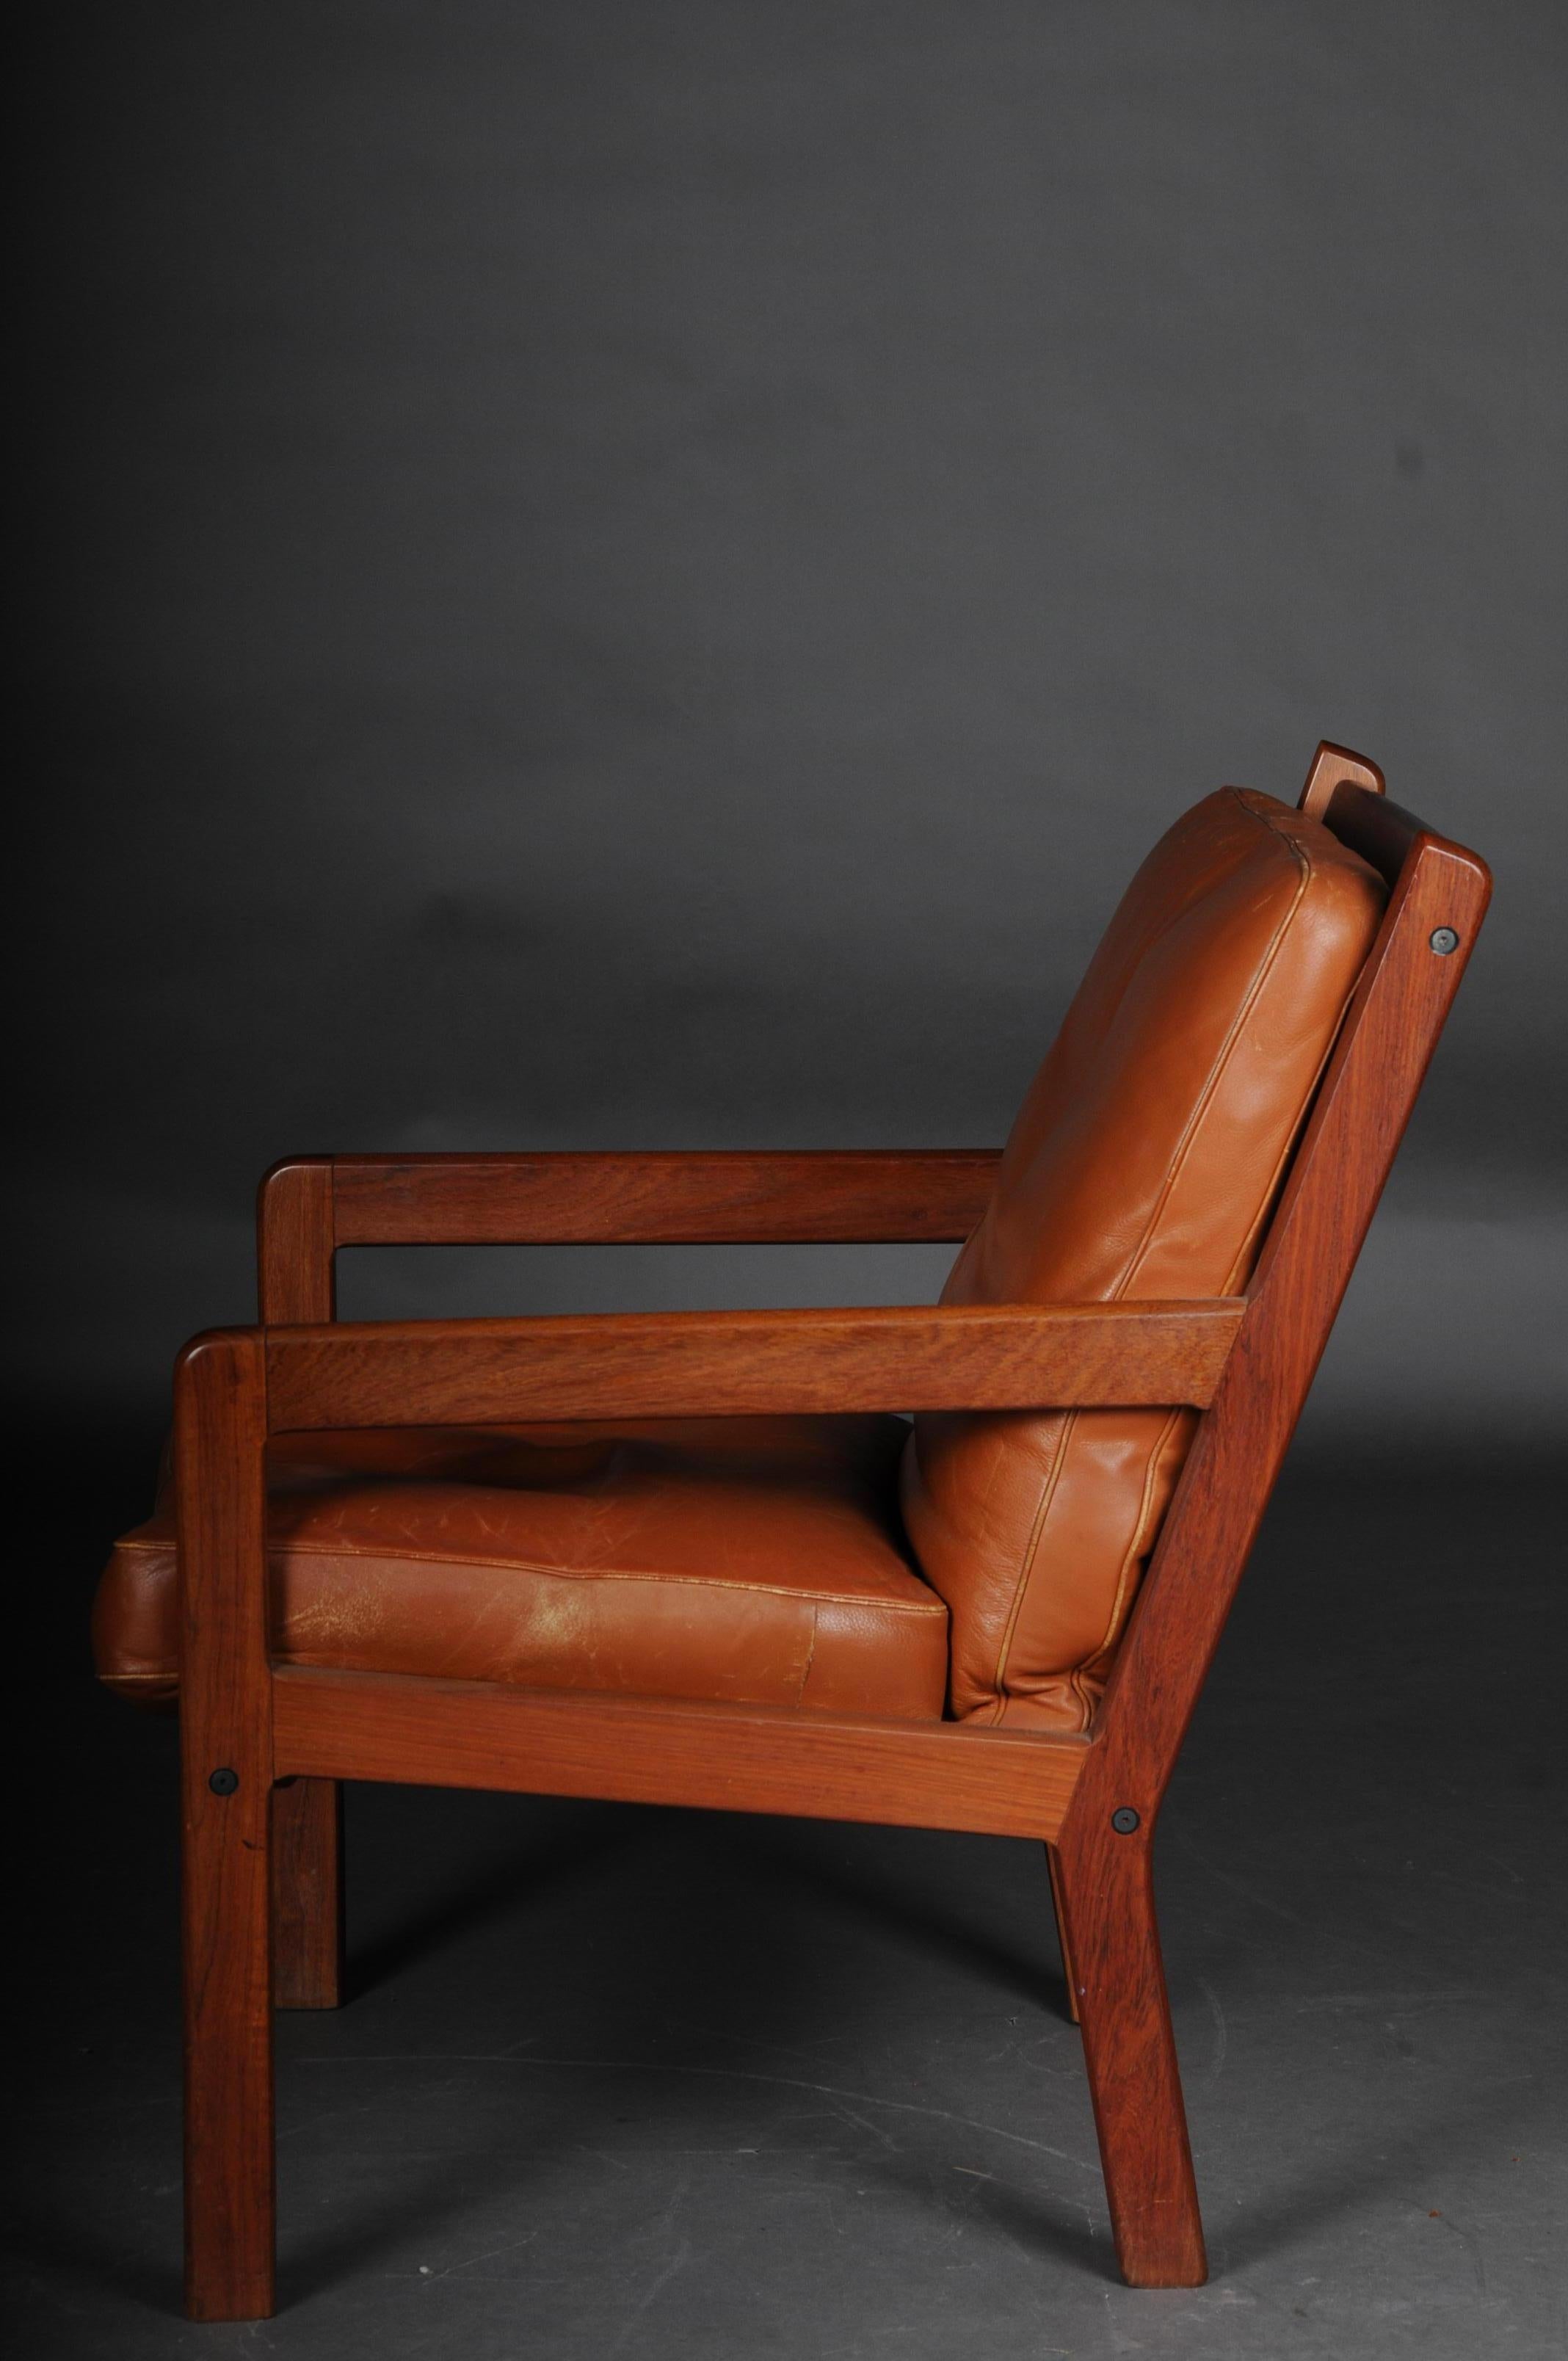 Leather Pair of vintage teak armchairs, chairs 60s / 70s, Danish